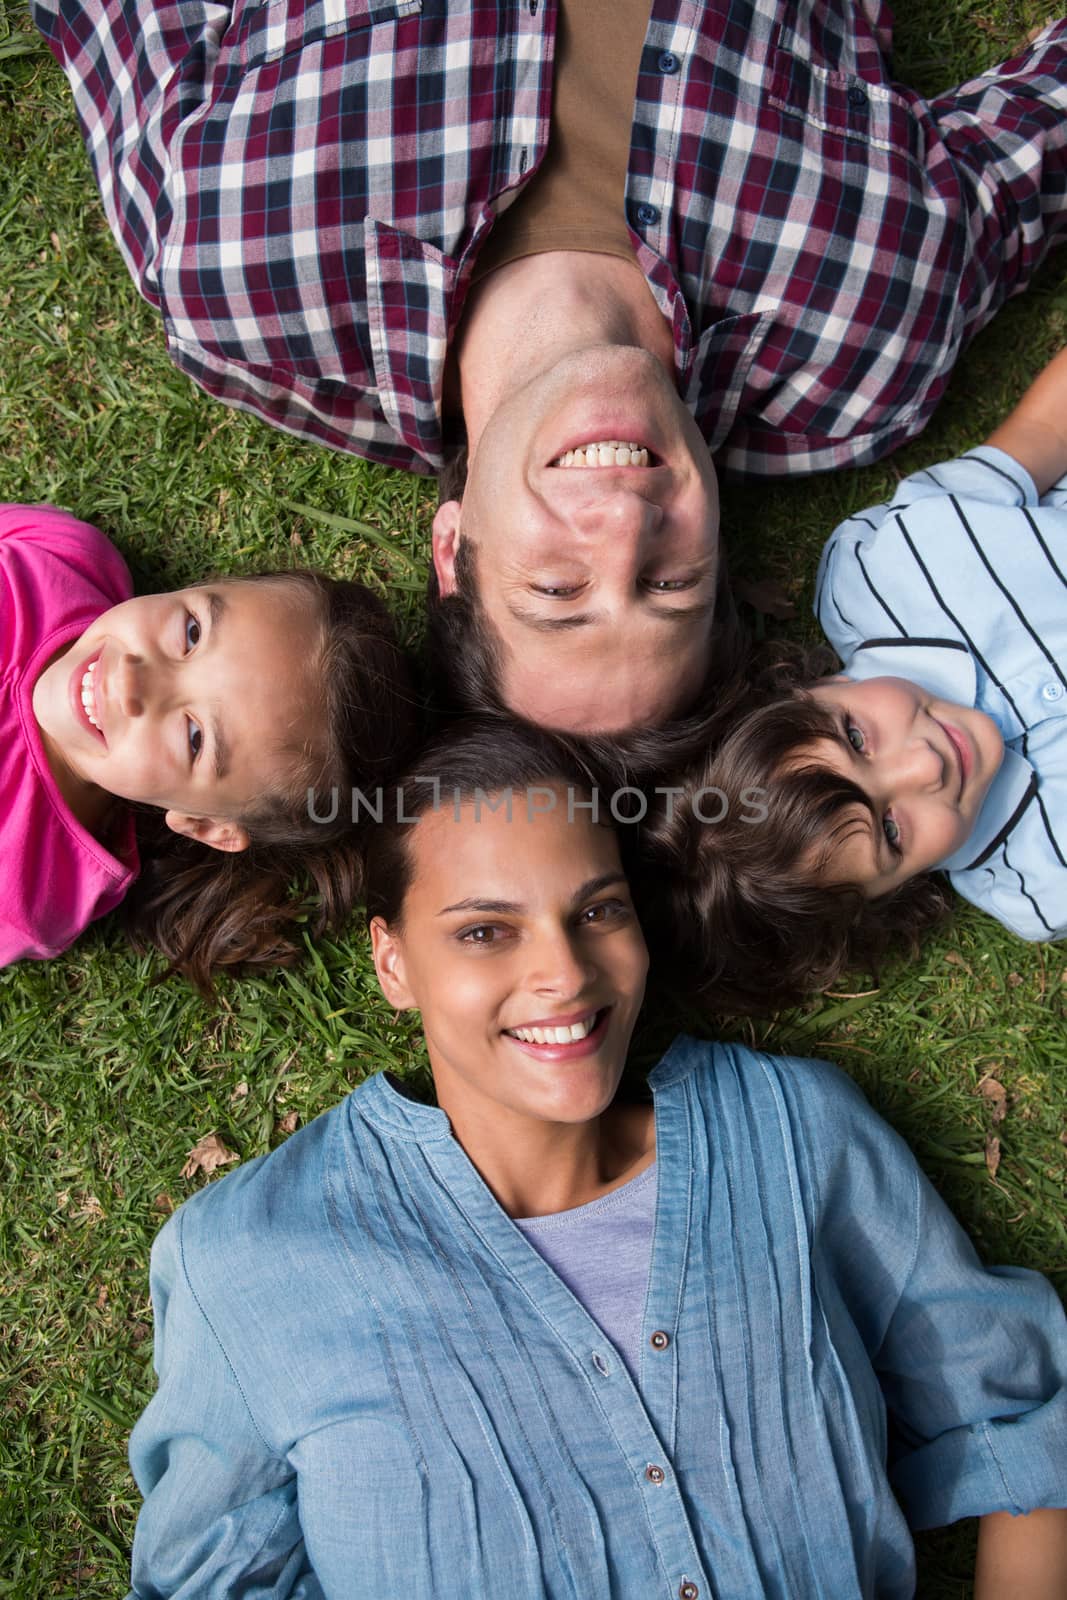 Happy family smiling at camera on a sunny day